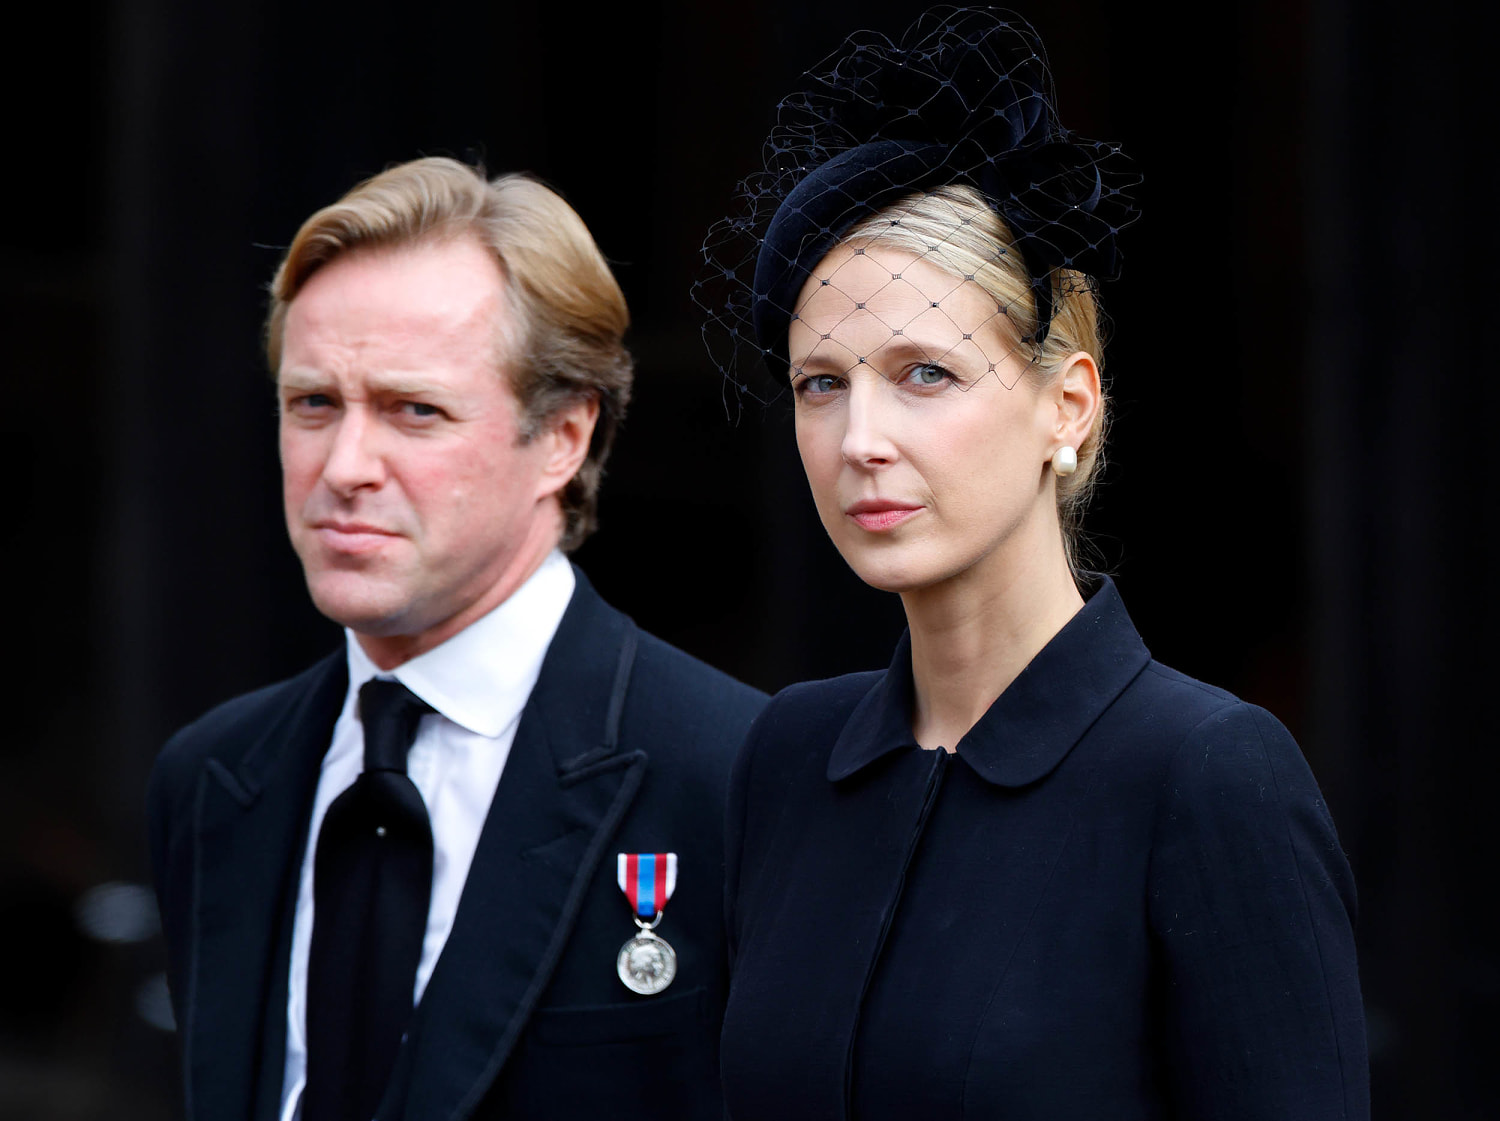 thomas kingston, husband of royal cousin and former boyfriend of pippa middleton, dies at 45